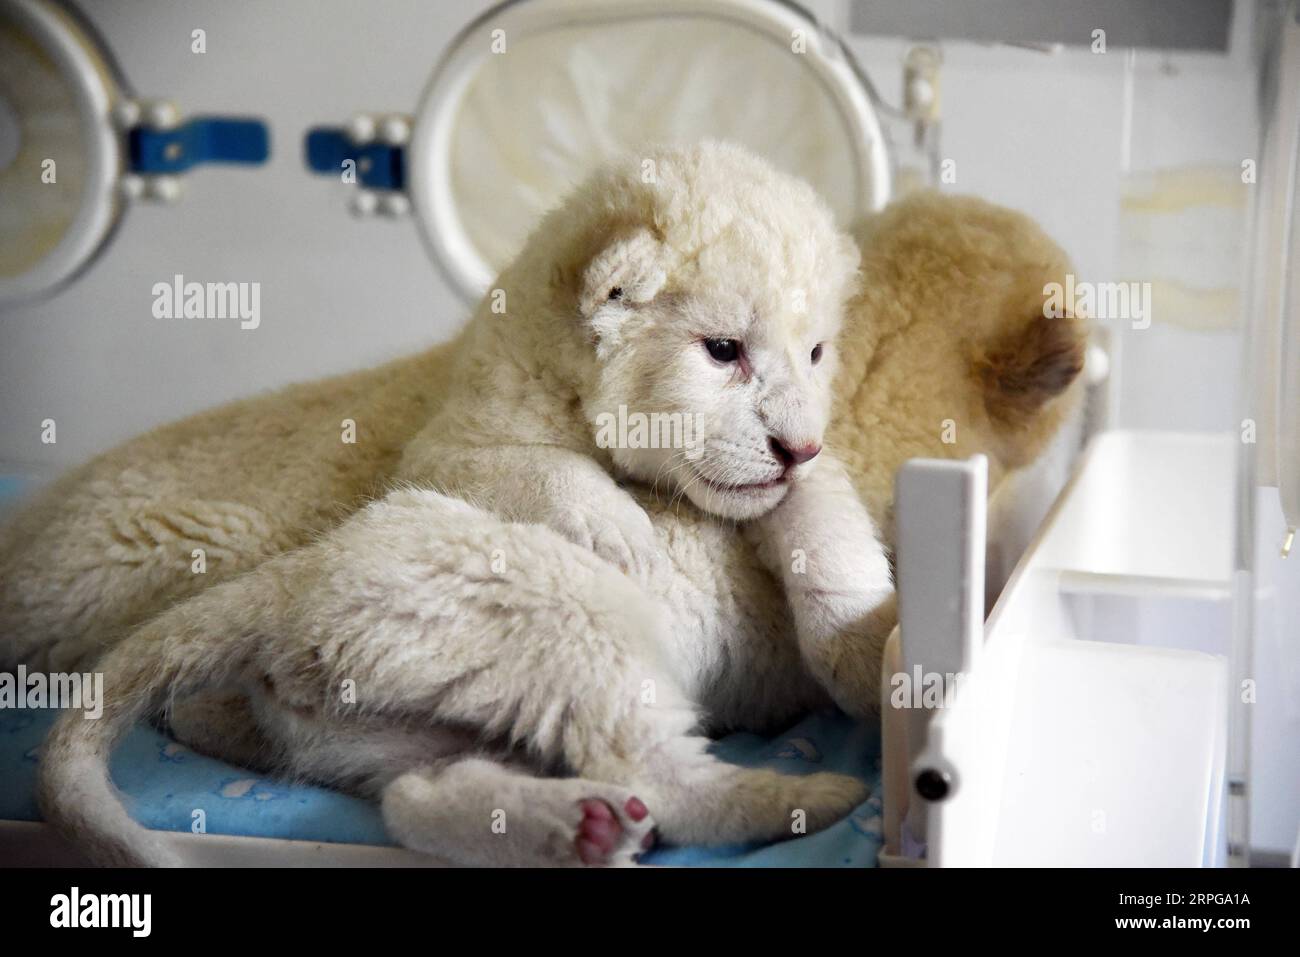 191009 -- JINAN, Oct. 9, 2019 -- A pair of newborn white lion twin cubs are pictured at Wild World Jinan, a wildlife park in Jinan, capital of east China s Shandong Province, Oct. 9, 2019. A white lion mother gave birth to a pair of twin cubs on Oct. 2 at Wild World Jinan. The two newborn cubs, a male and a female, are in good health condition and will meet public visitors following an observation period. The white lion is a rare wildlife species mostly found in southern Africa.  CHINA-SHANDONG-JINAN-WHITE LION CUBS-BIRTH CN WangxKai PUBLICATIONxNOTxINxCHN Stock Photo